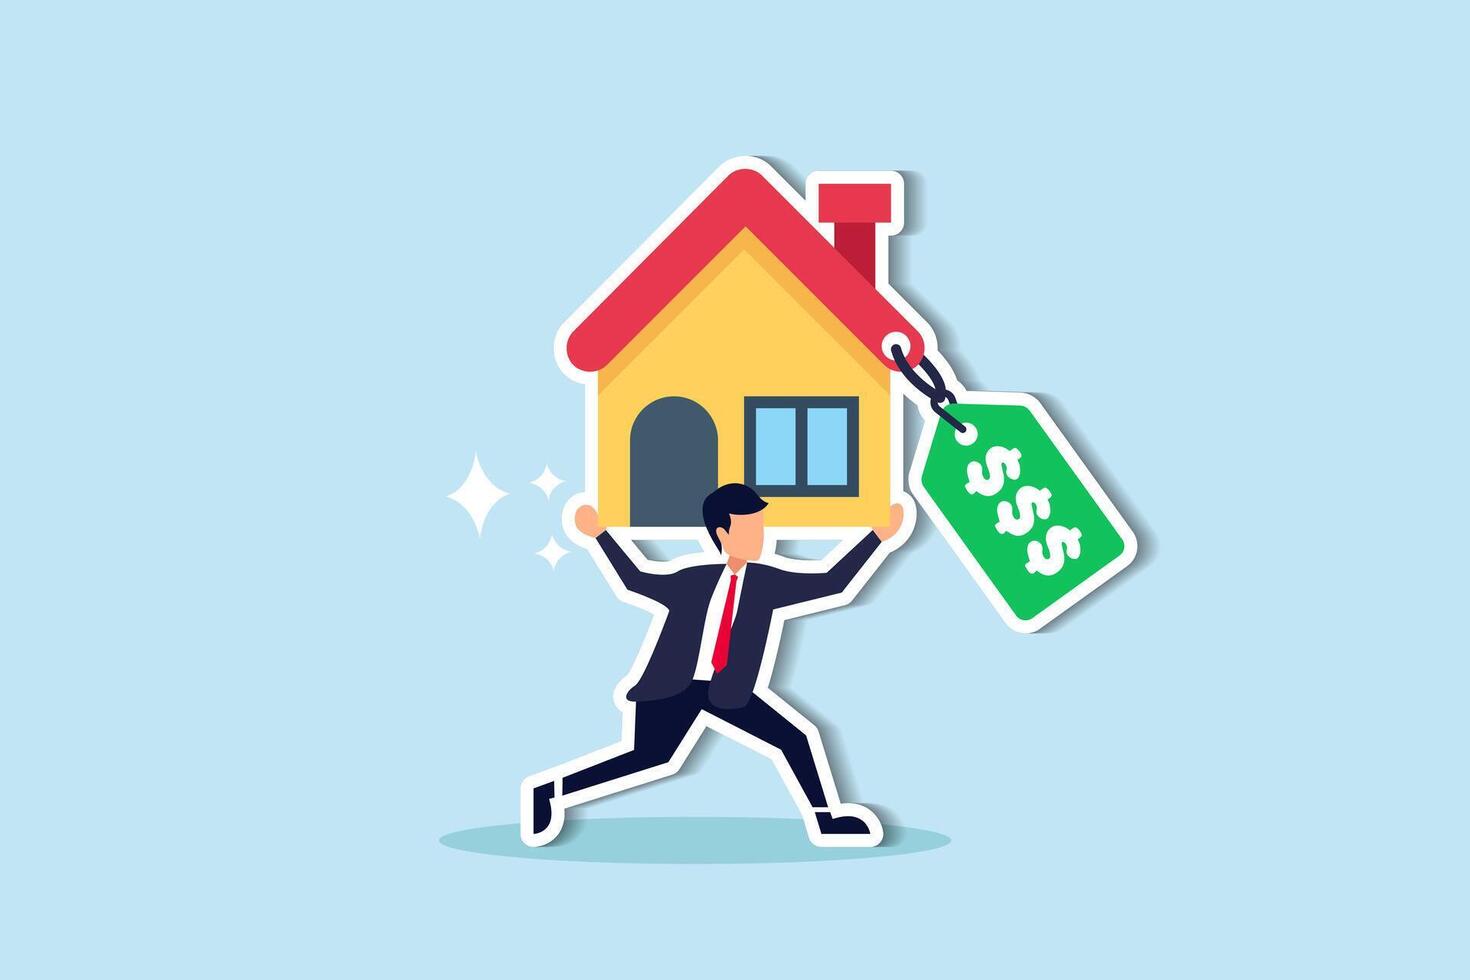 Overpay in real estate and house mortgage, too much invest or expense to pay for debt and loan in economic crisis concept, tried depressed office worker man carrying house with expensive price tag. vector